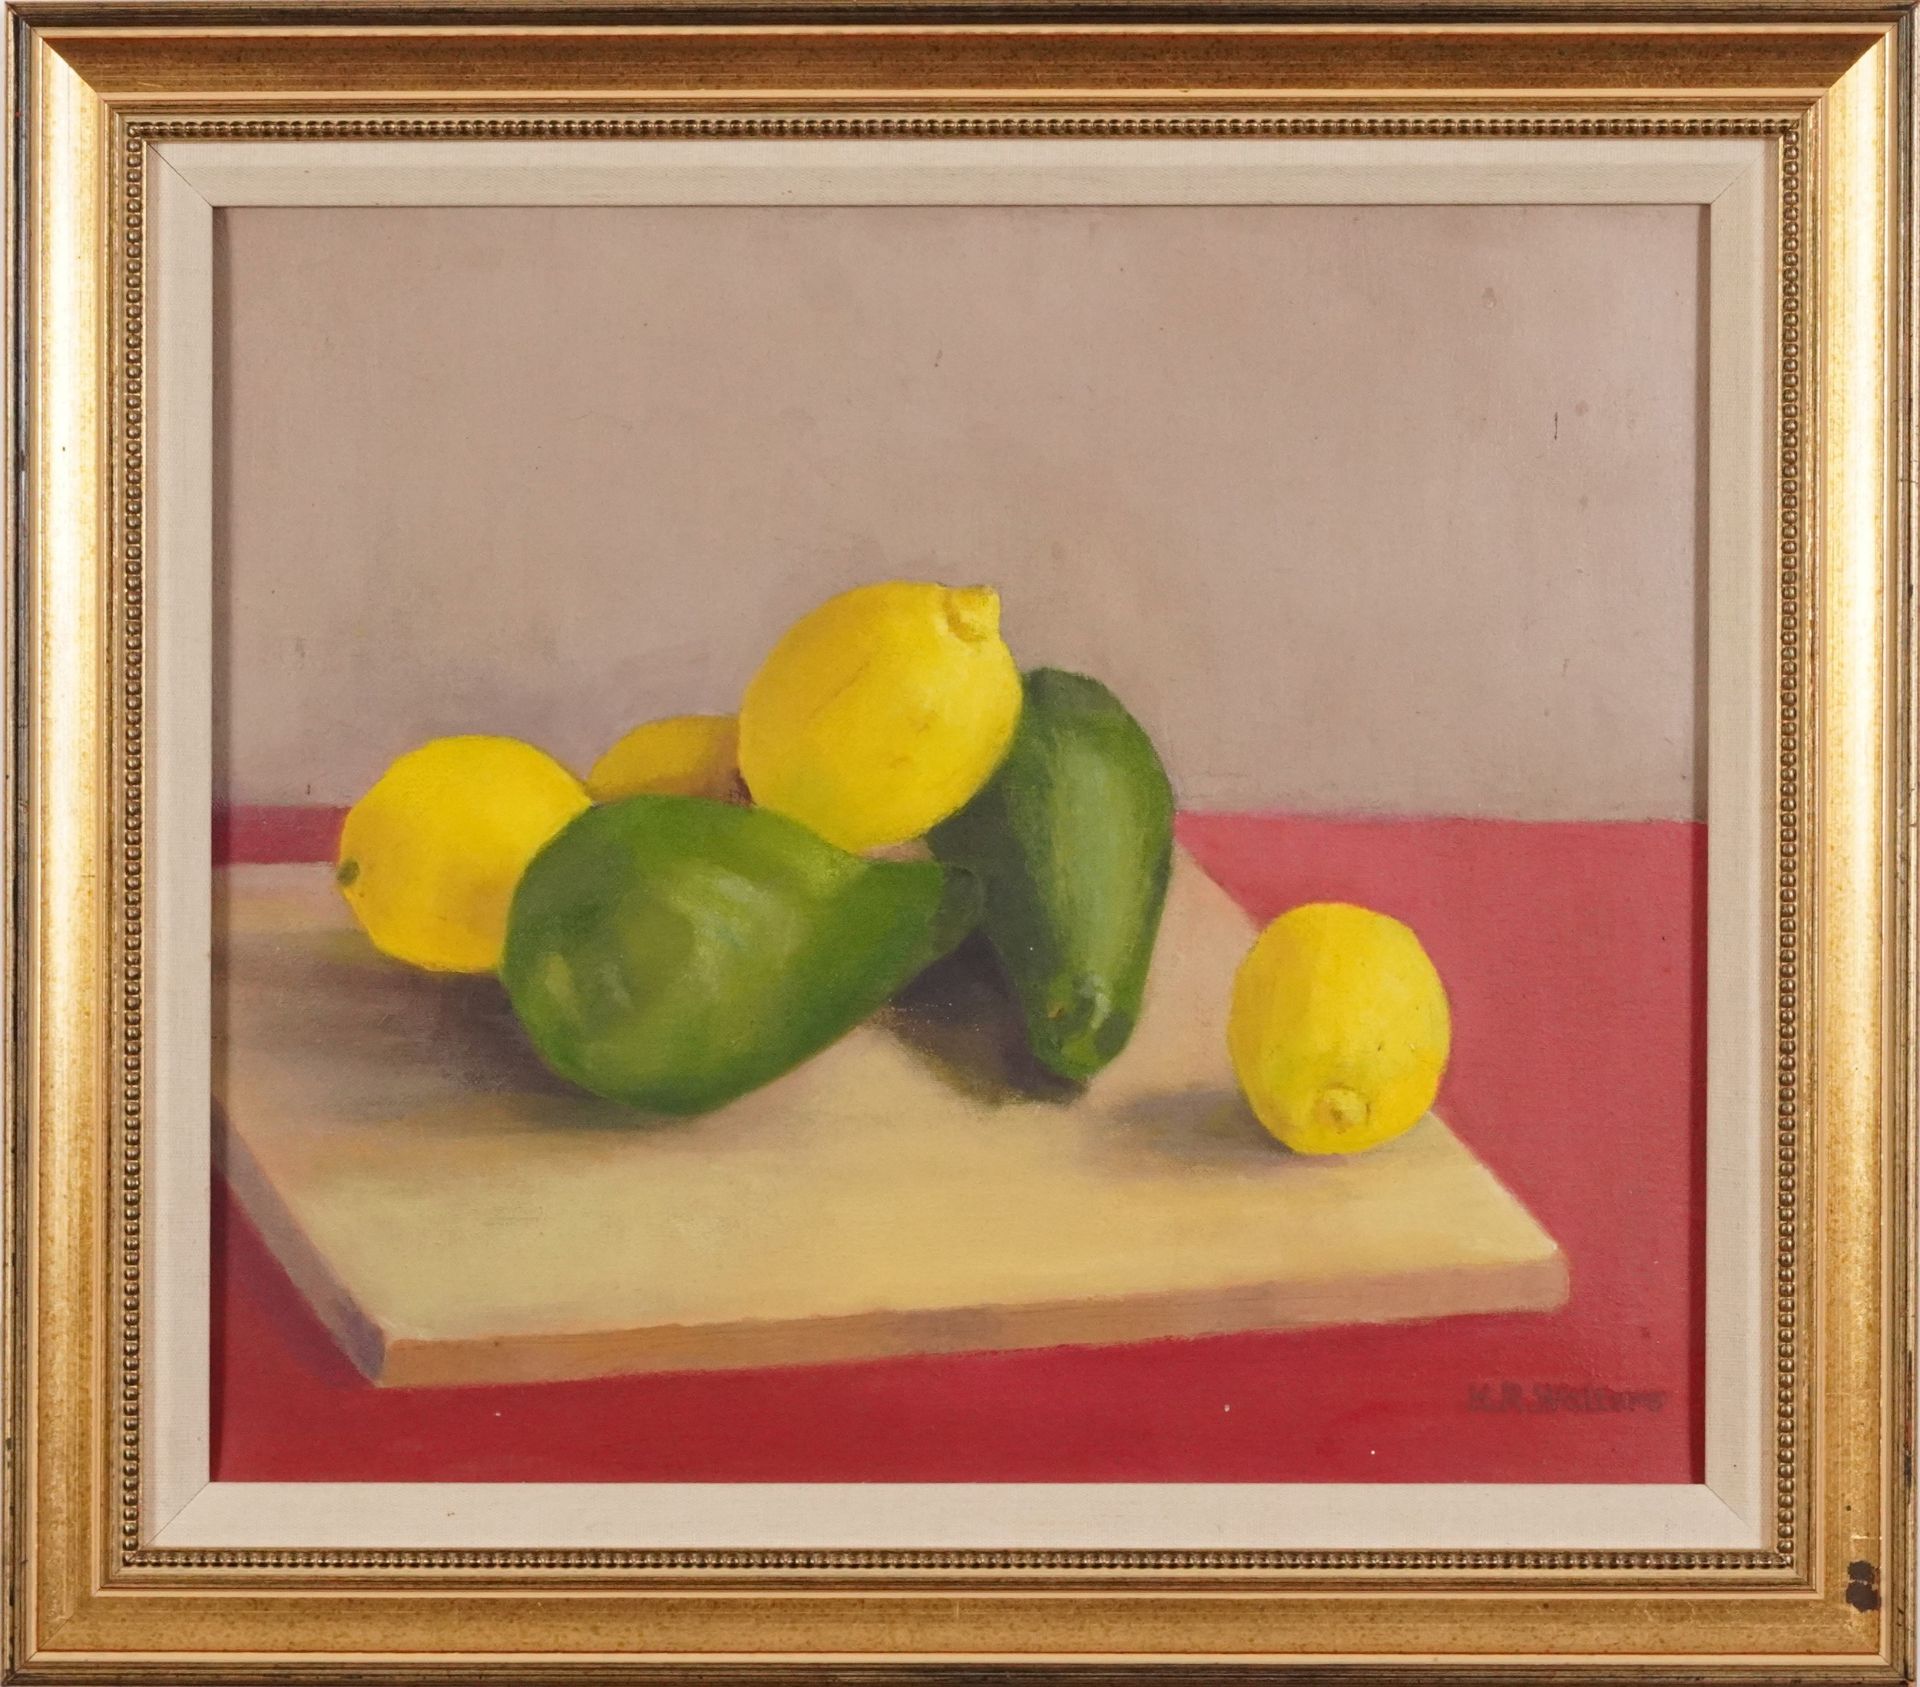 H R Walters - Still life lemons and pears, oil on canvas, mounted and framed, 40cm x 34.5cm - Image 2 of 4